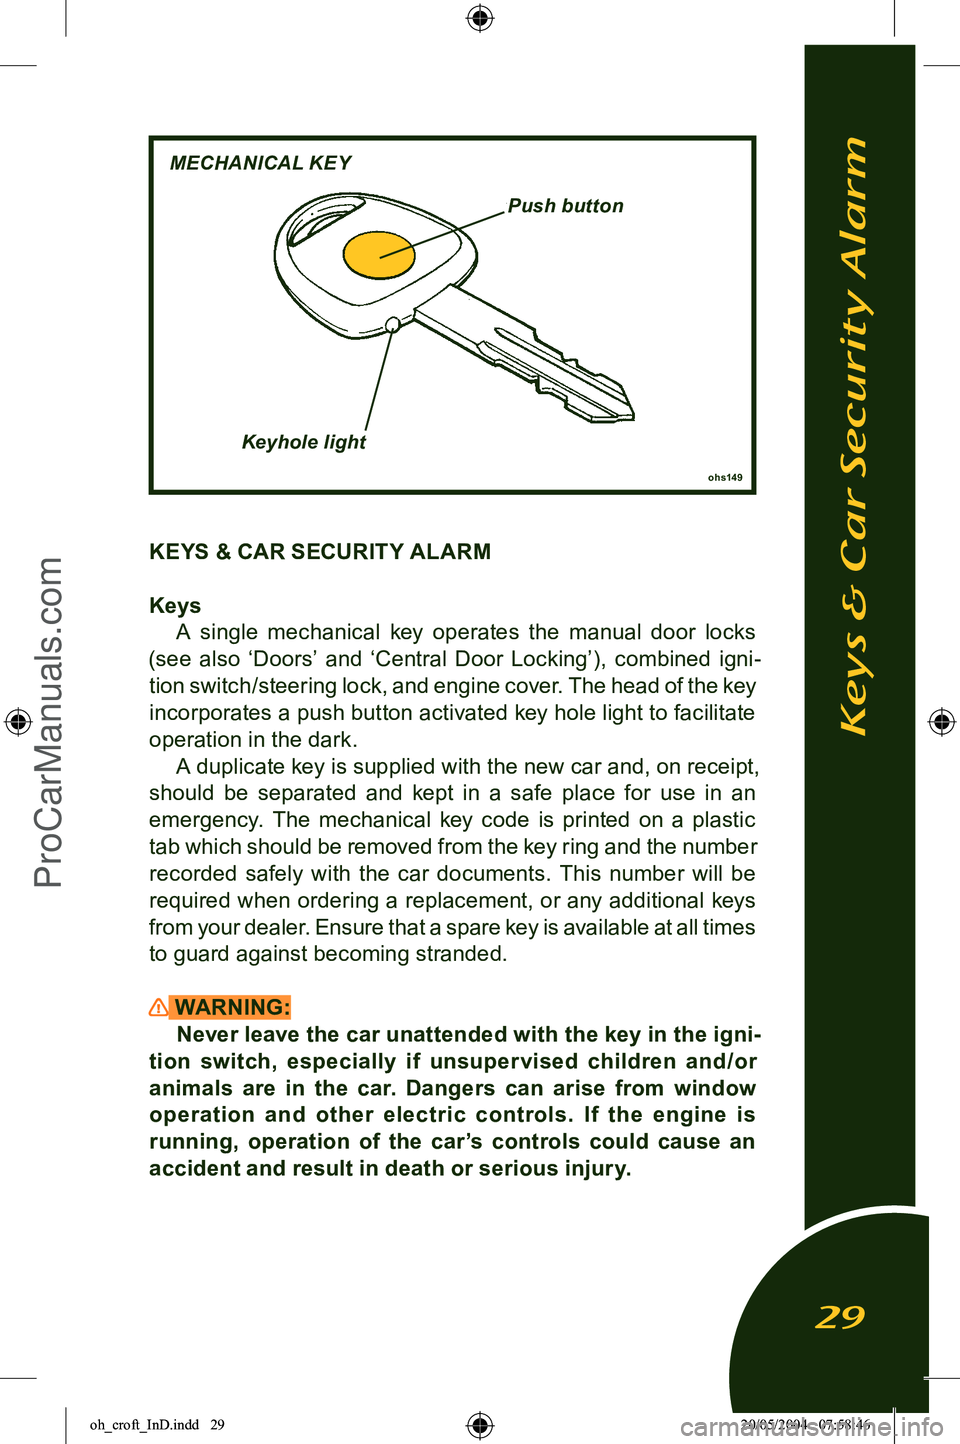 LOTUS ELISE 2005 Owners Guide 
KEYS & CAR SECURITY ALARM
KeysA  single  mechanical  key  operates  the  manual  door  locks 
(see  also  ‘Doors’  and  ‘Central  Door  Locking’),  combined  igni
-
tion switch/steering lock,